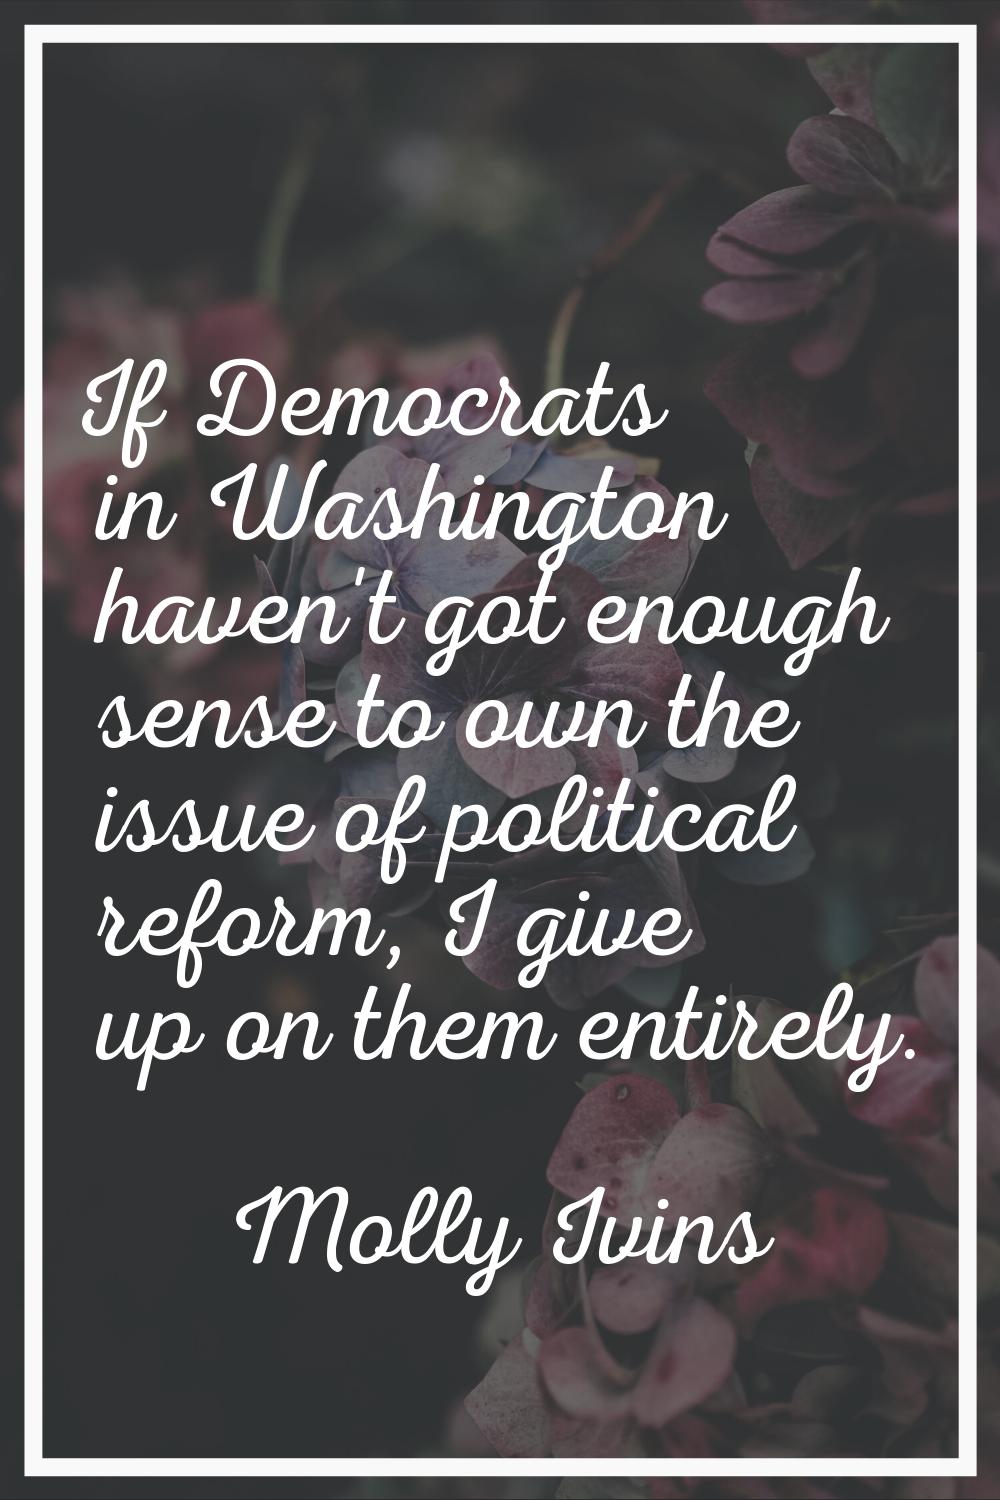 If Democrats in Washington haven't got enough sense to own the issue of political reform, I give up